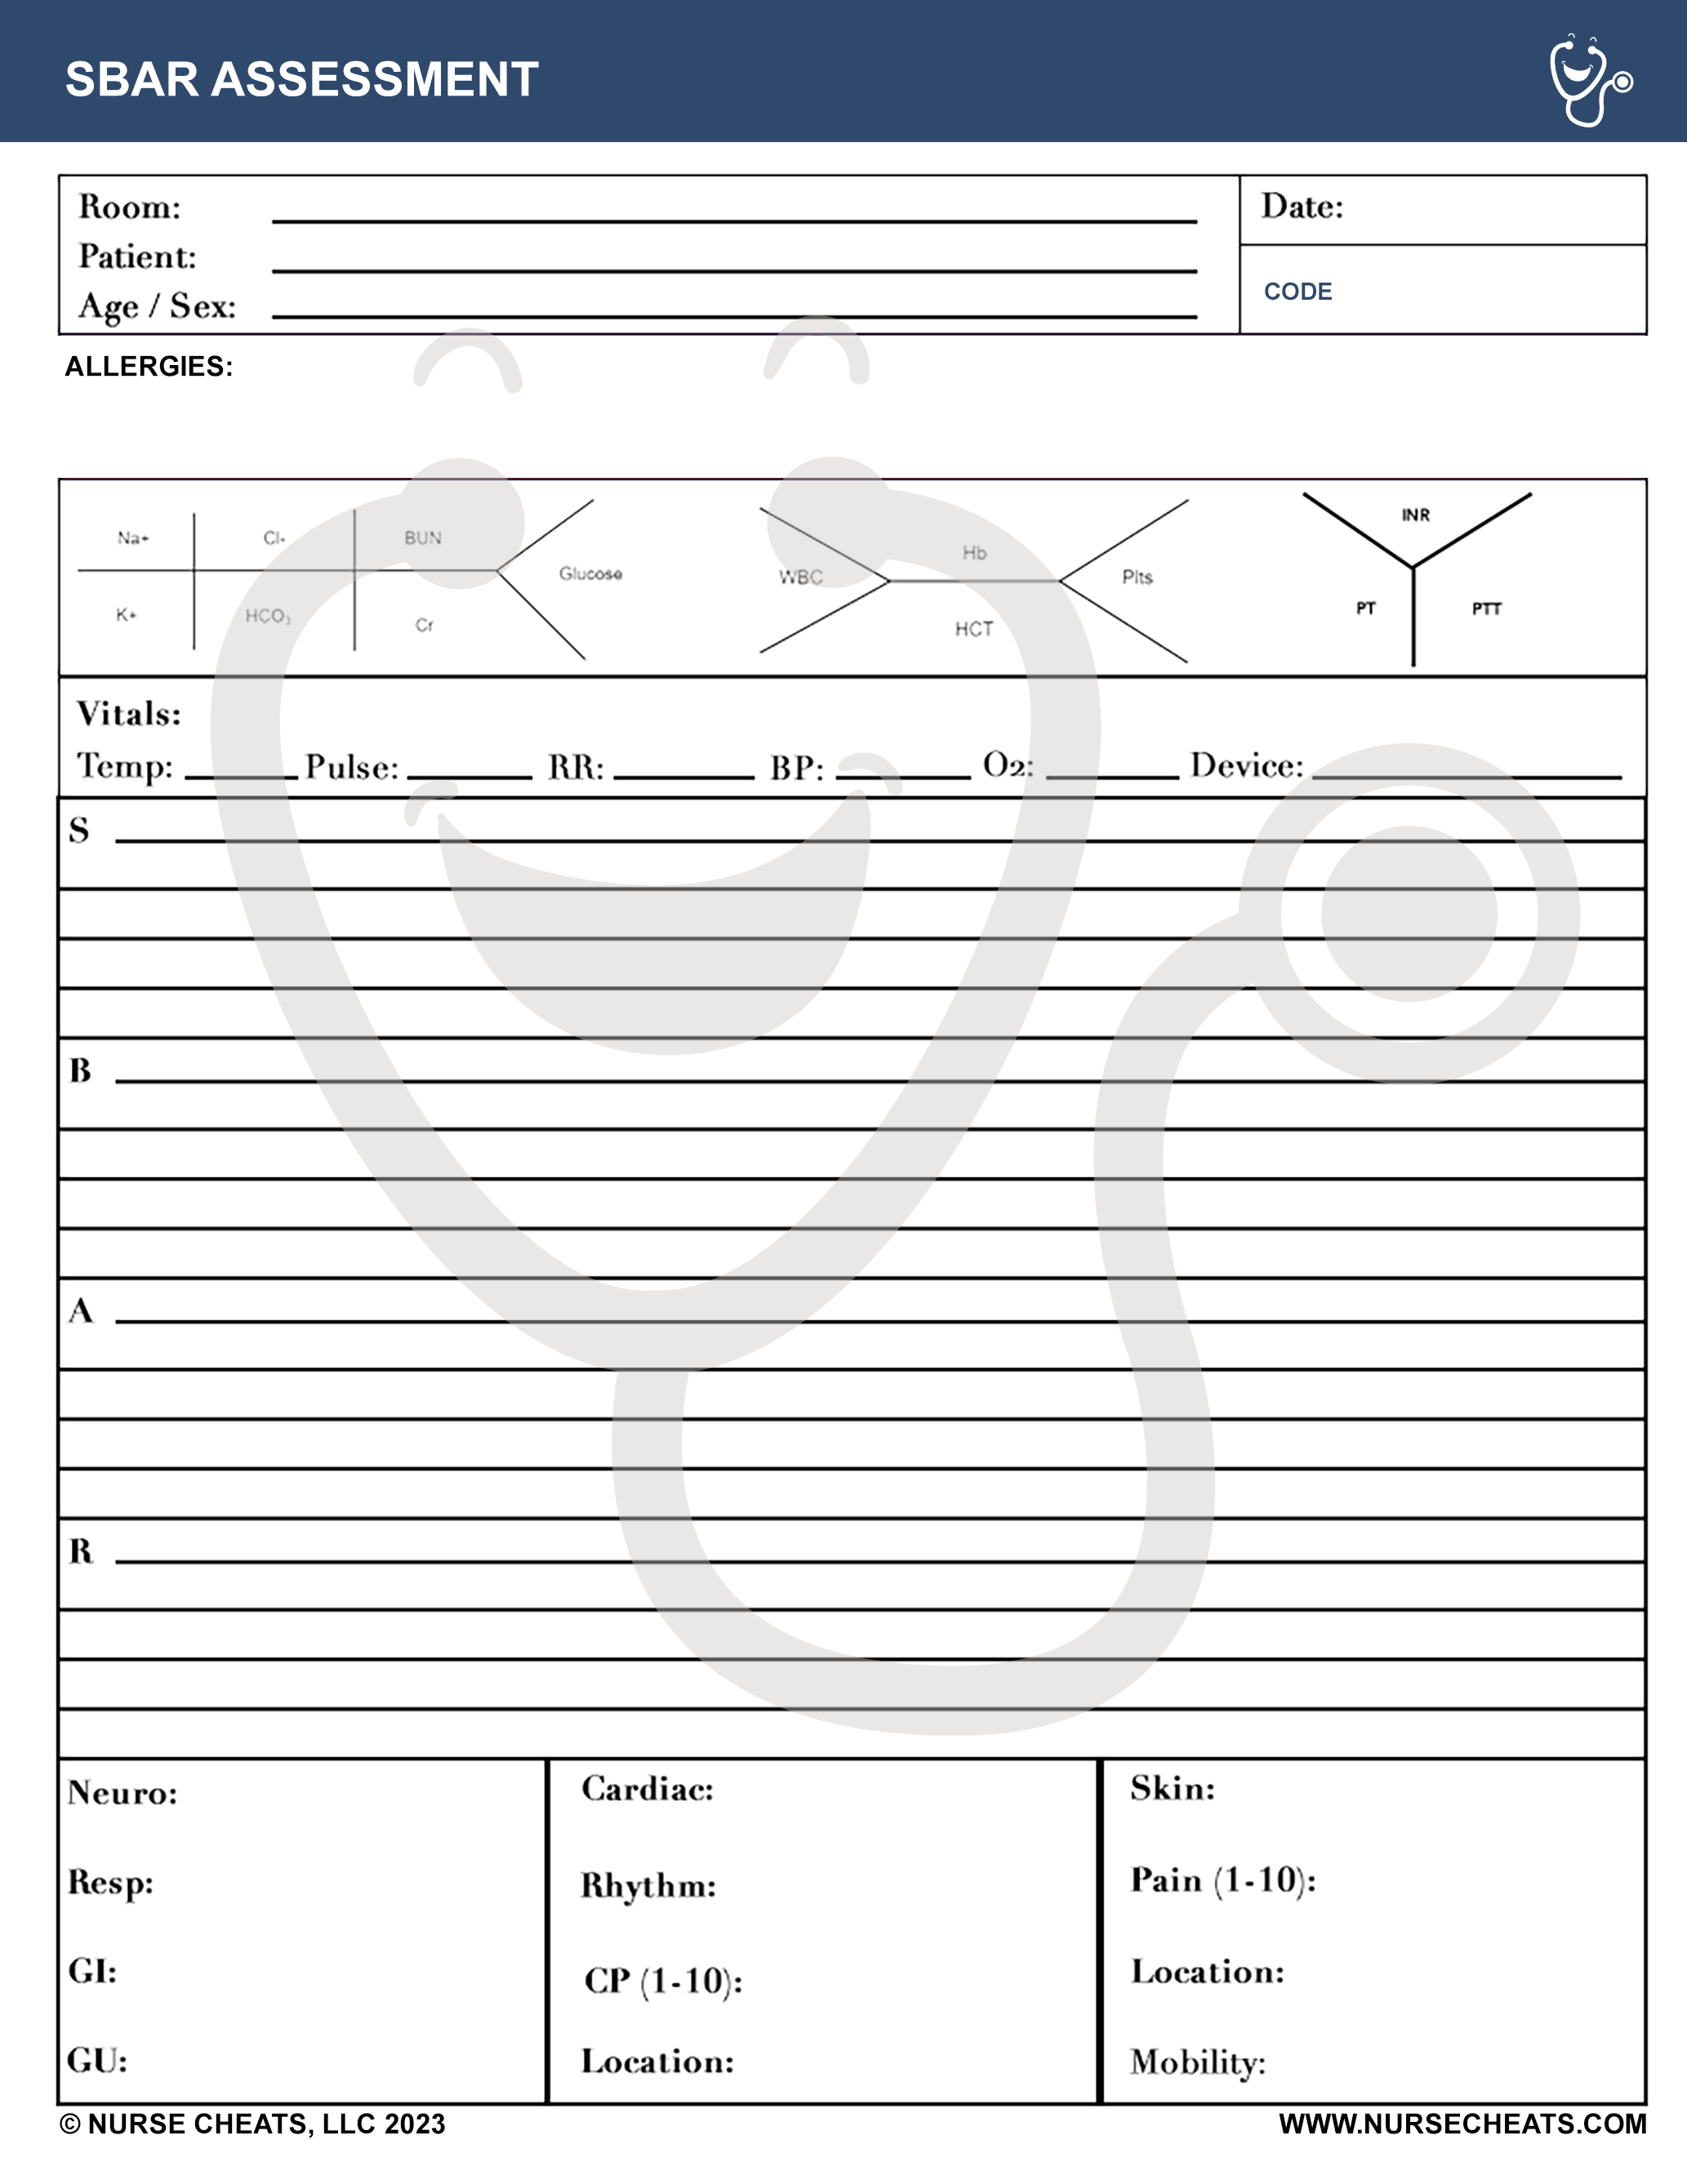 SBAR Assessment Sheet for Nurses and Nursing School. SBAR is the standard for communication in Nursing.  This form is a short form that will help you communicate in a standard and concise way.